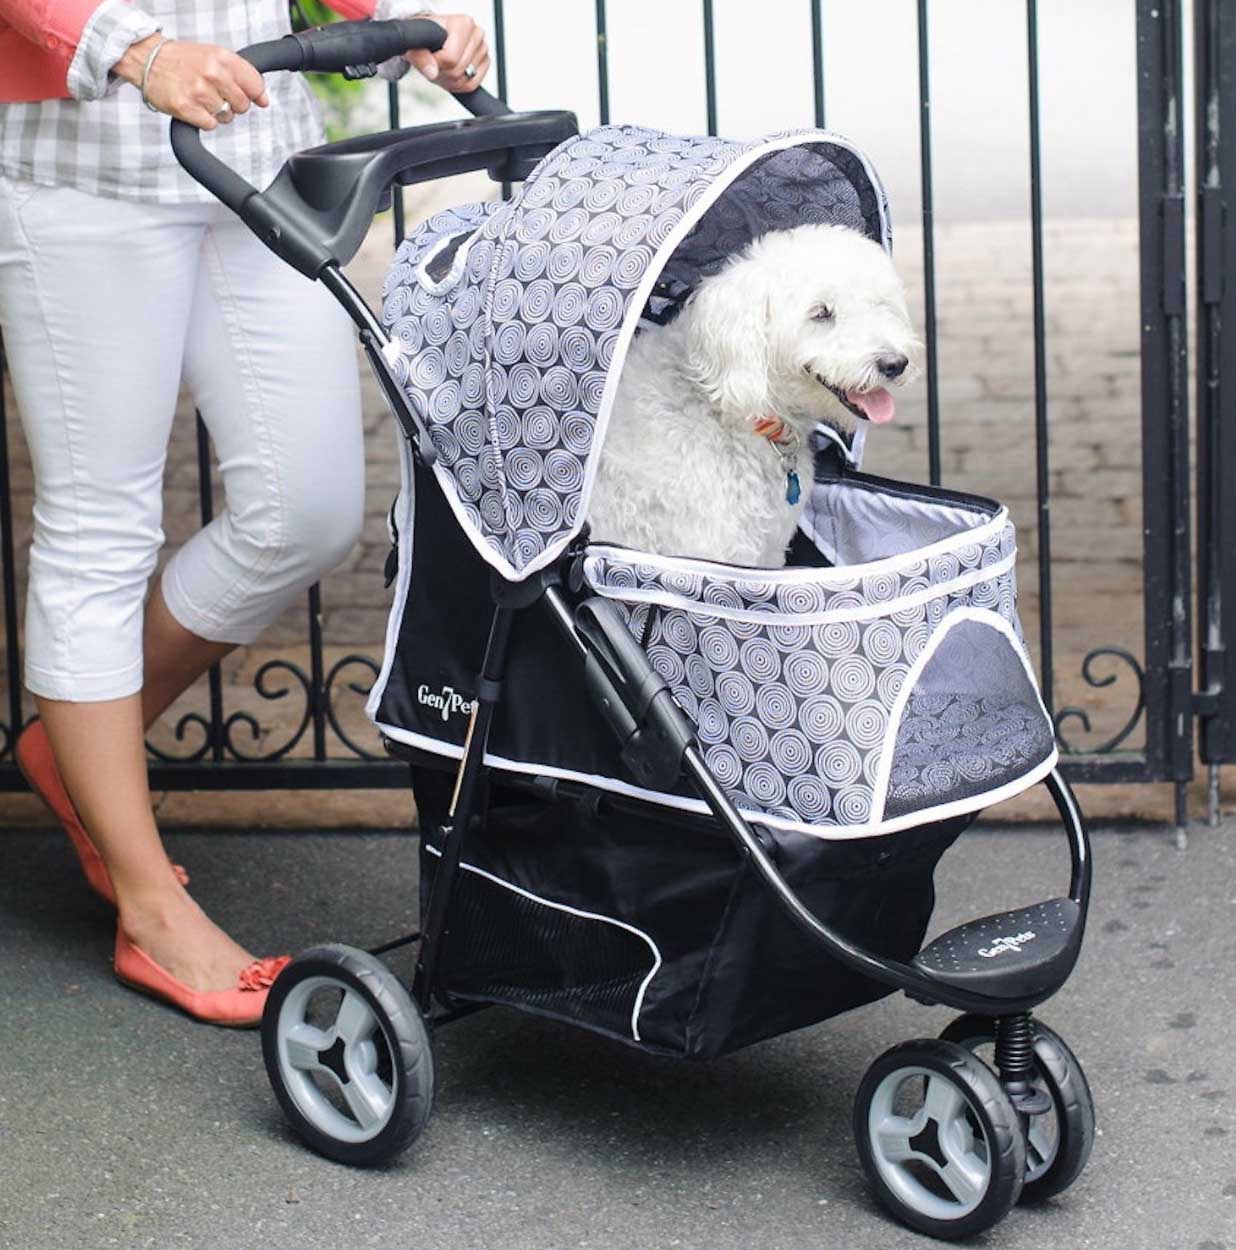 Reasons for dog owners getting pet strollers